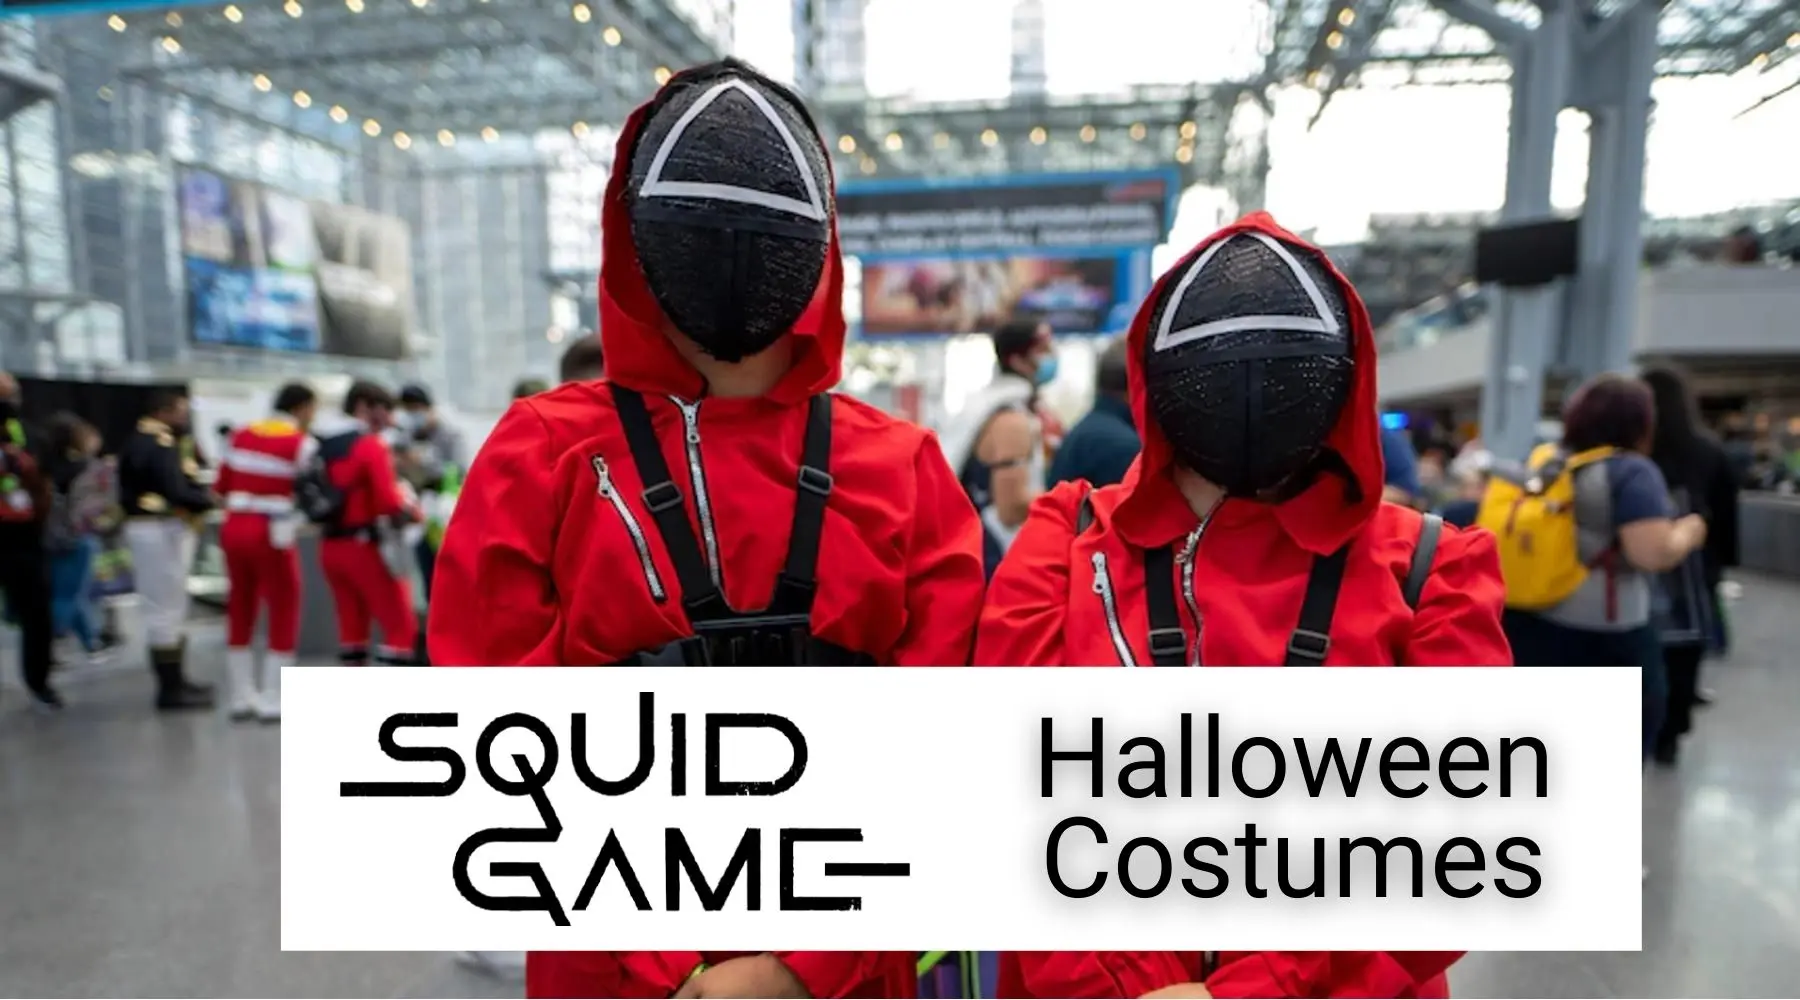 Where to buy Squid Game costumes in Australia